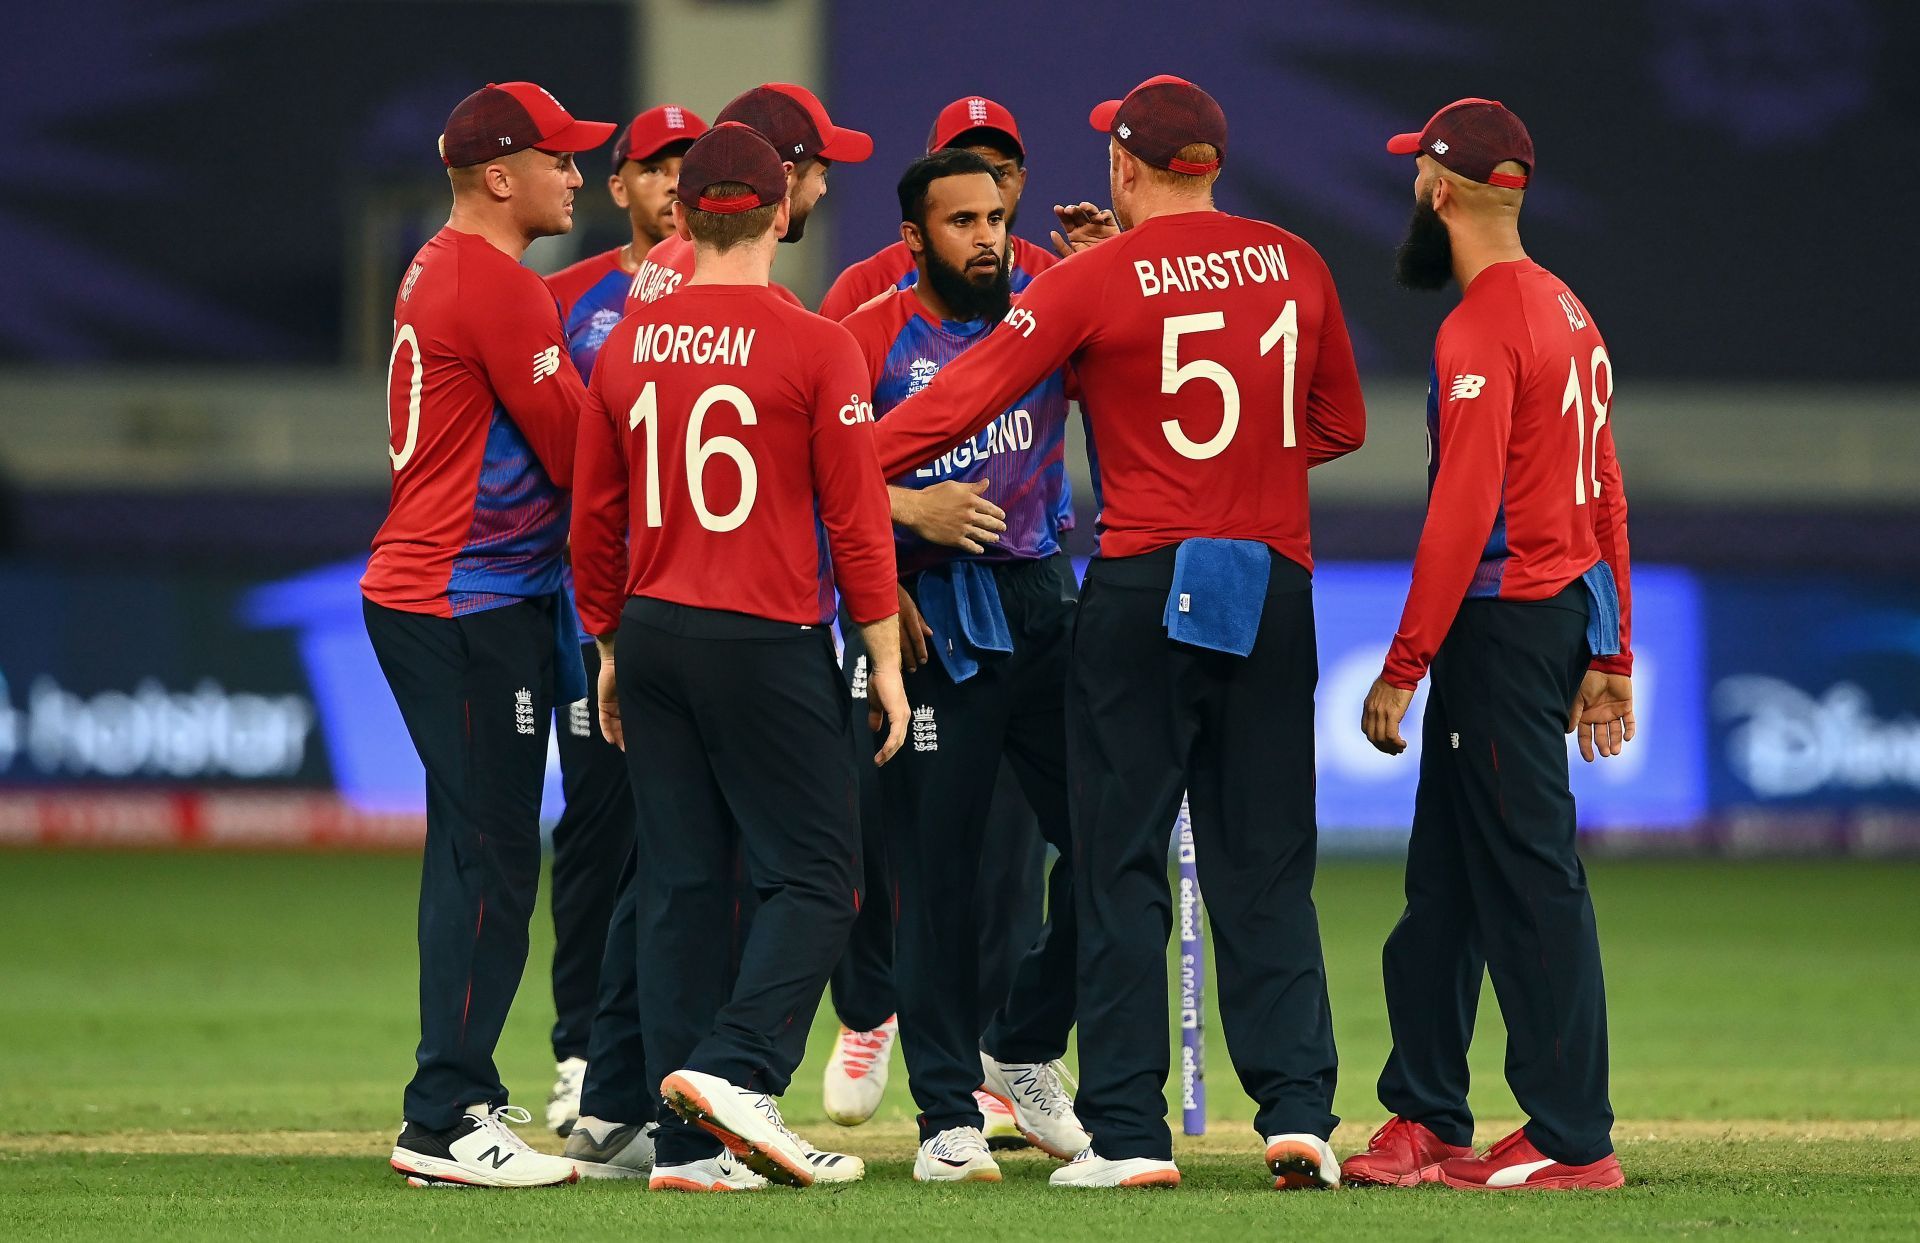 English team celebrating the fall of a wicket against West Indies